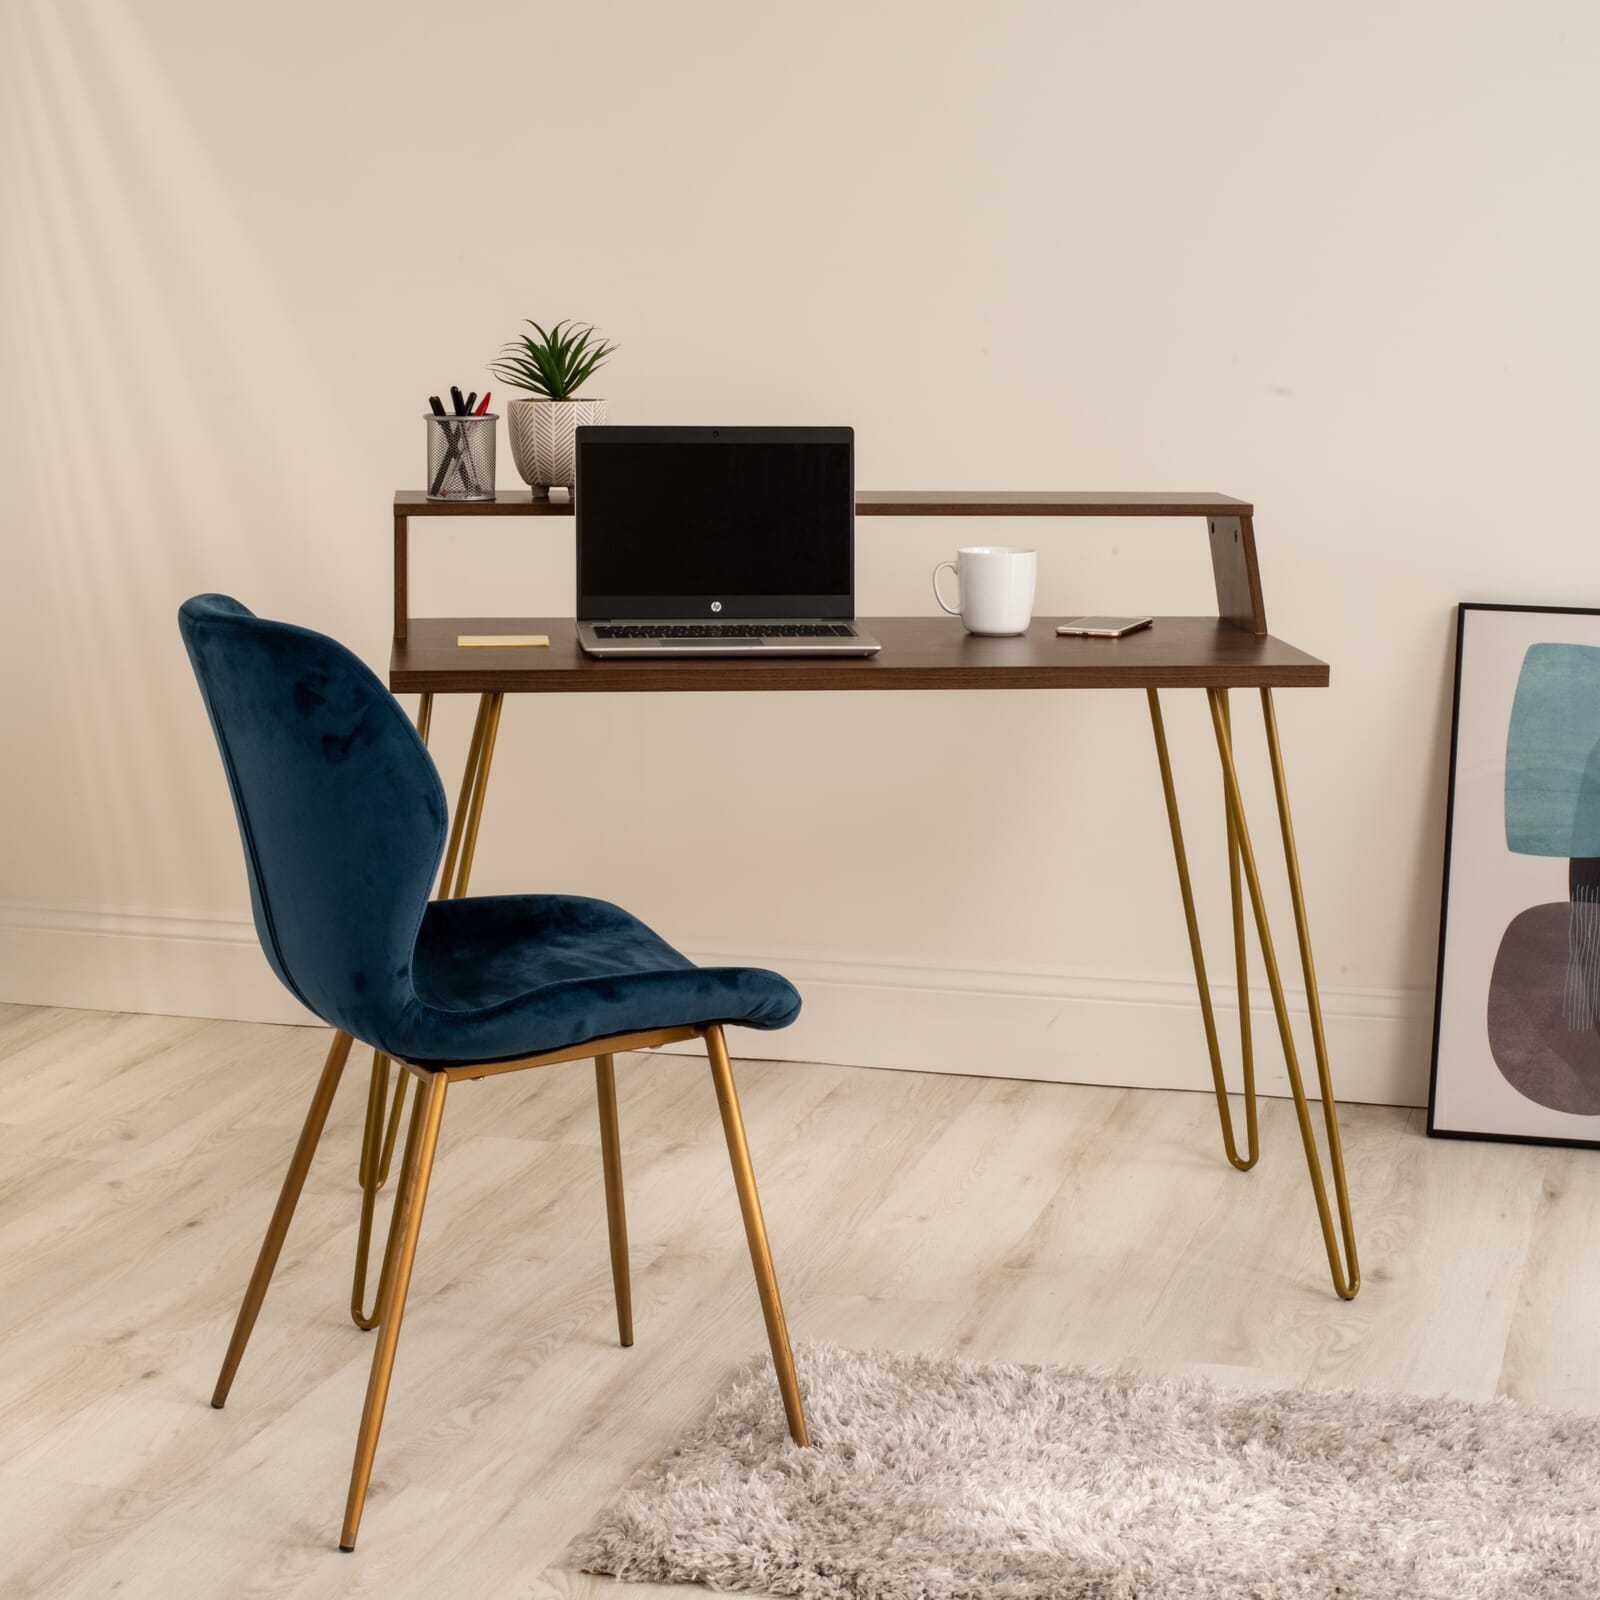 The Bea Smart Desk from Koble features an integrated wireless charging point to keep your phone topped up while you work. 